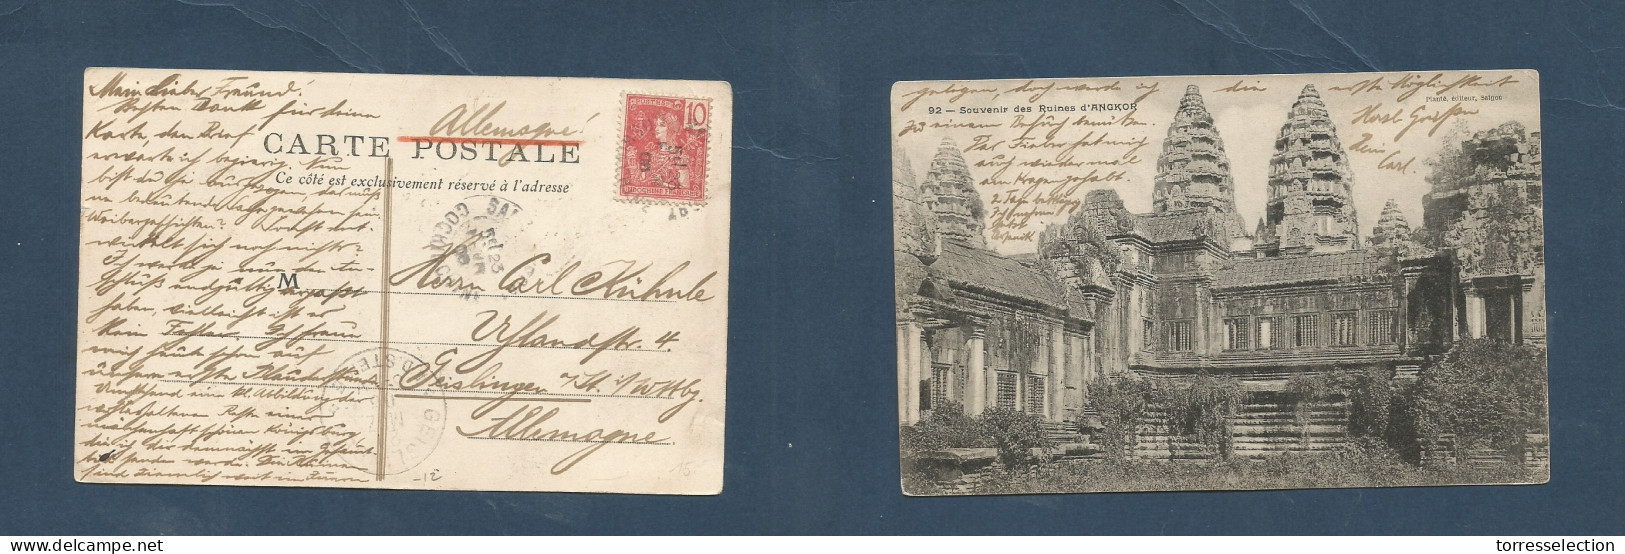 INDOCHINA. 1905 (23 Febr) Saigon - Germany, Geislingen (28 March) 10c Fkd Ppc. Ancrents Temple. XSALE. - Asia (Other)